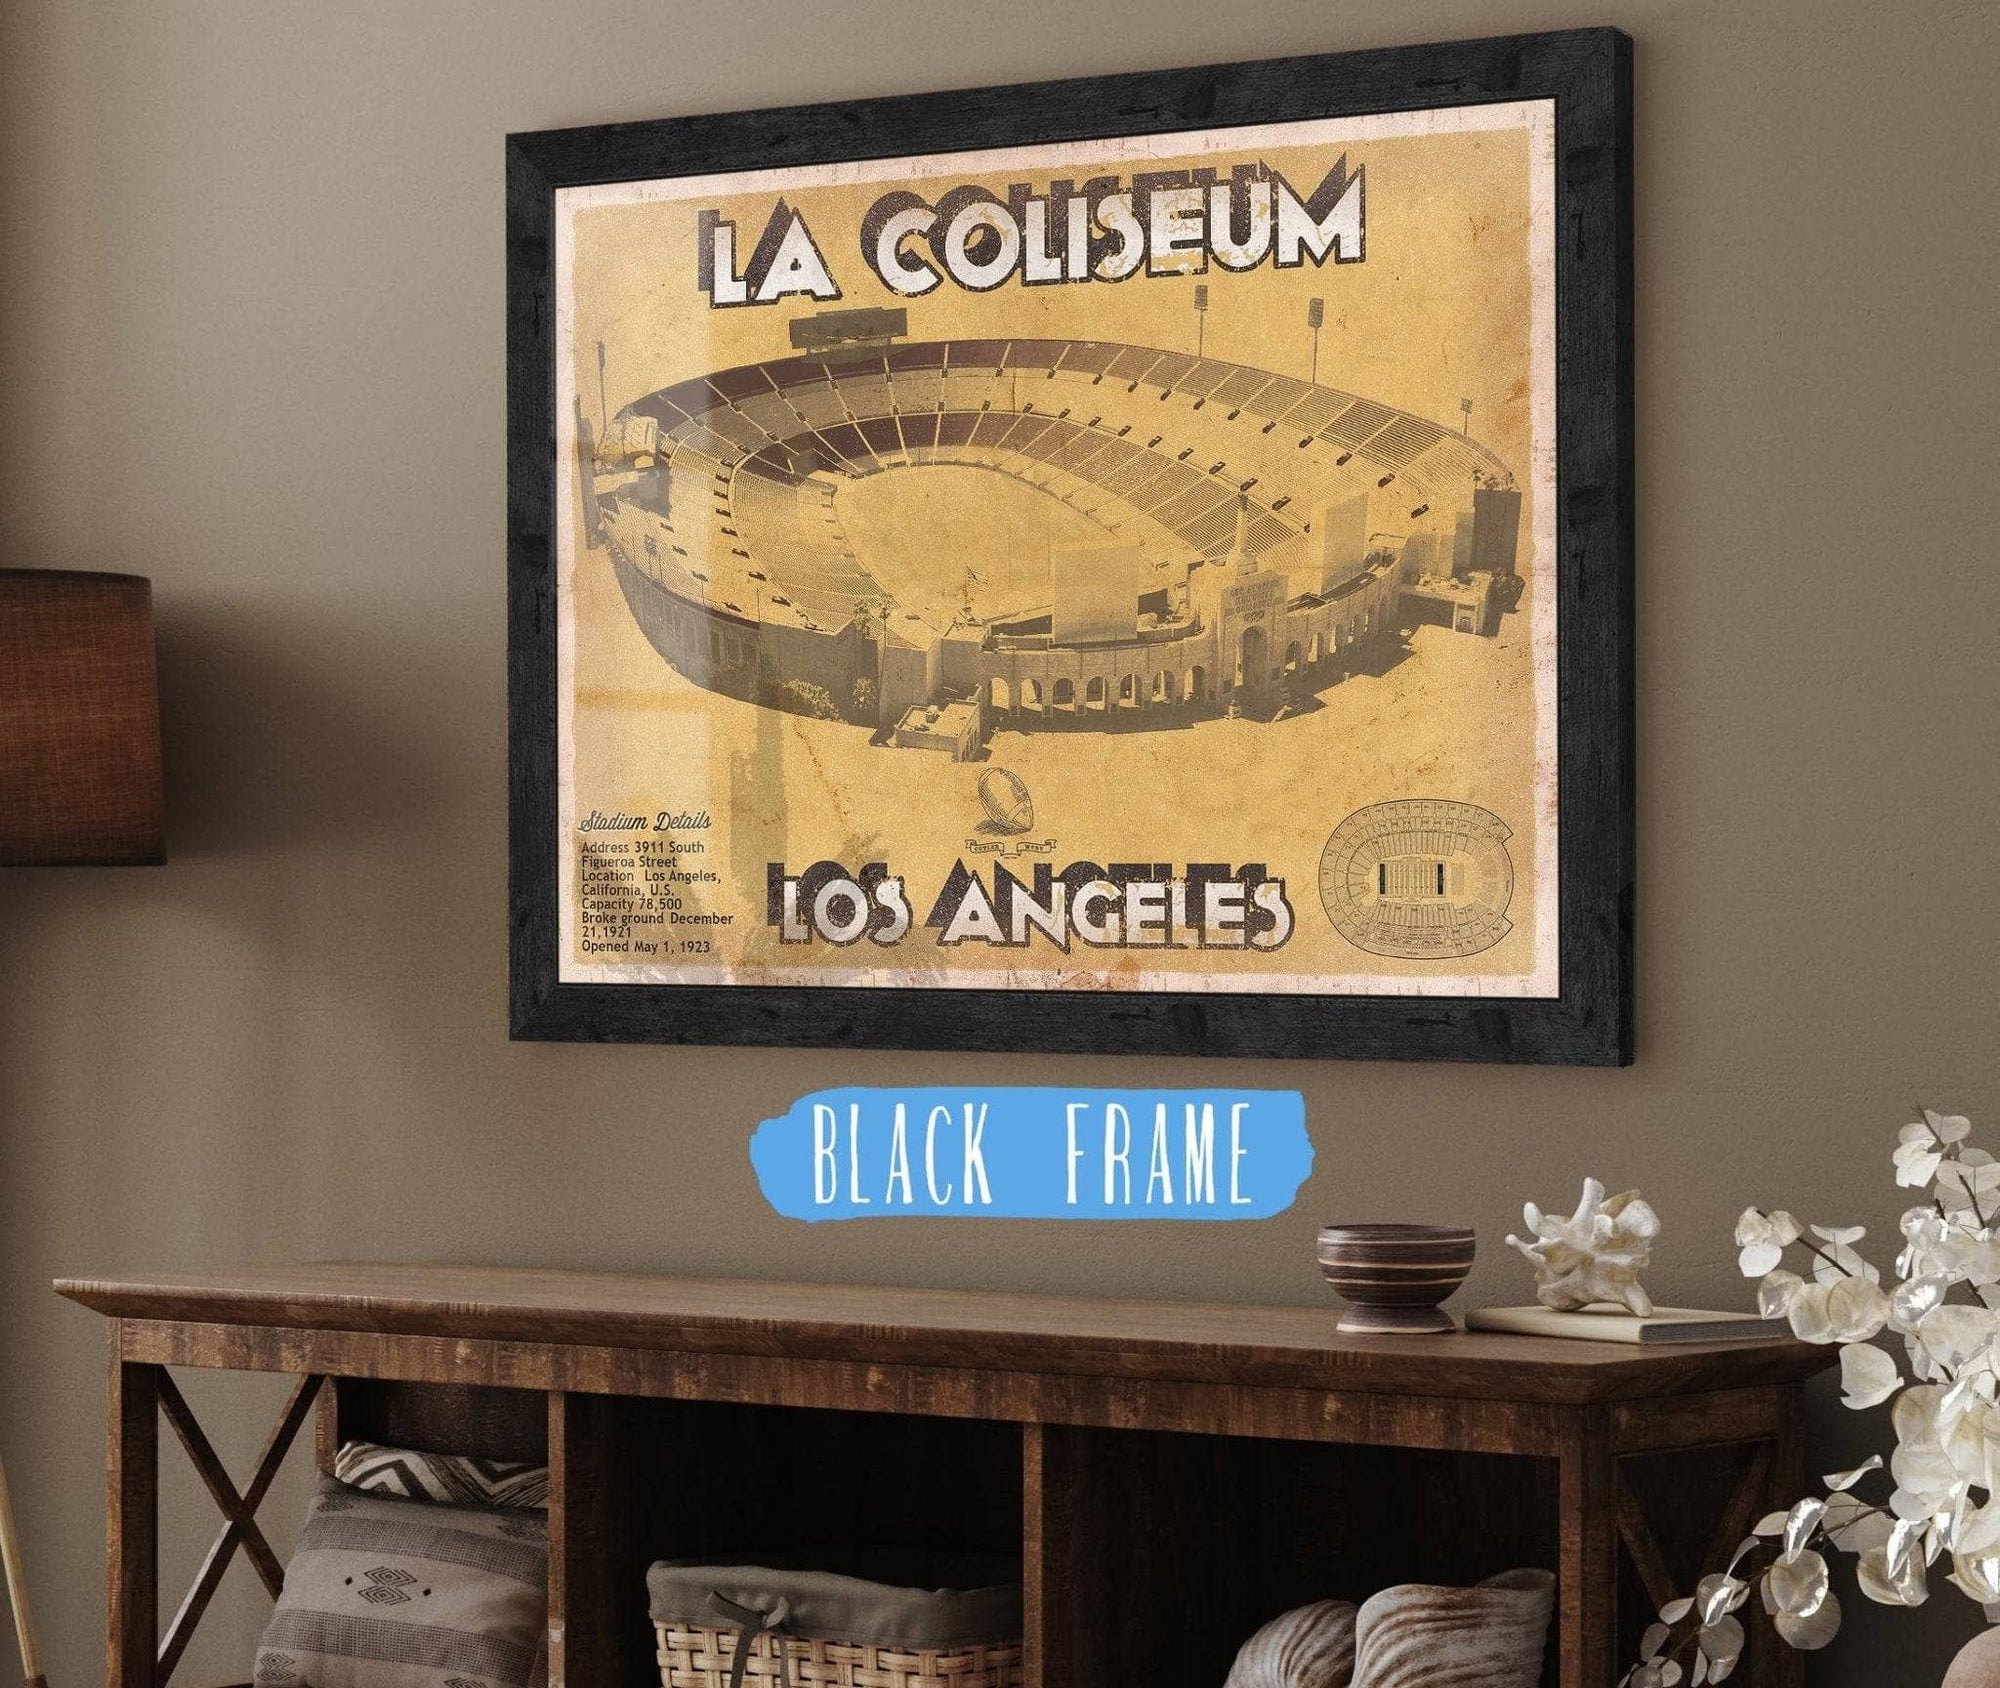 Cutler West Pro Football Collection 14" x 11" / Black Frame Los Angeles Rams LA Coliseum Seating Chart - Vintage Football Print 728039387_65237